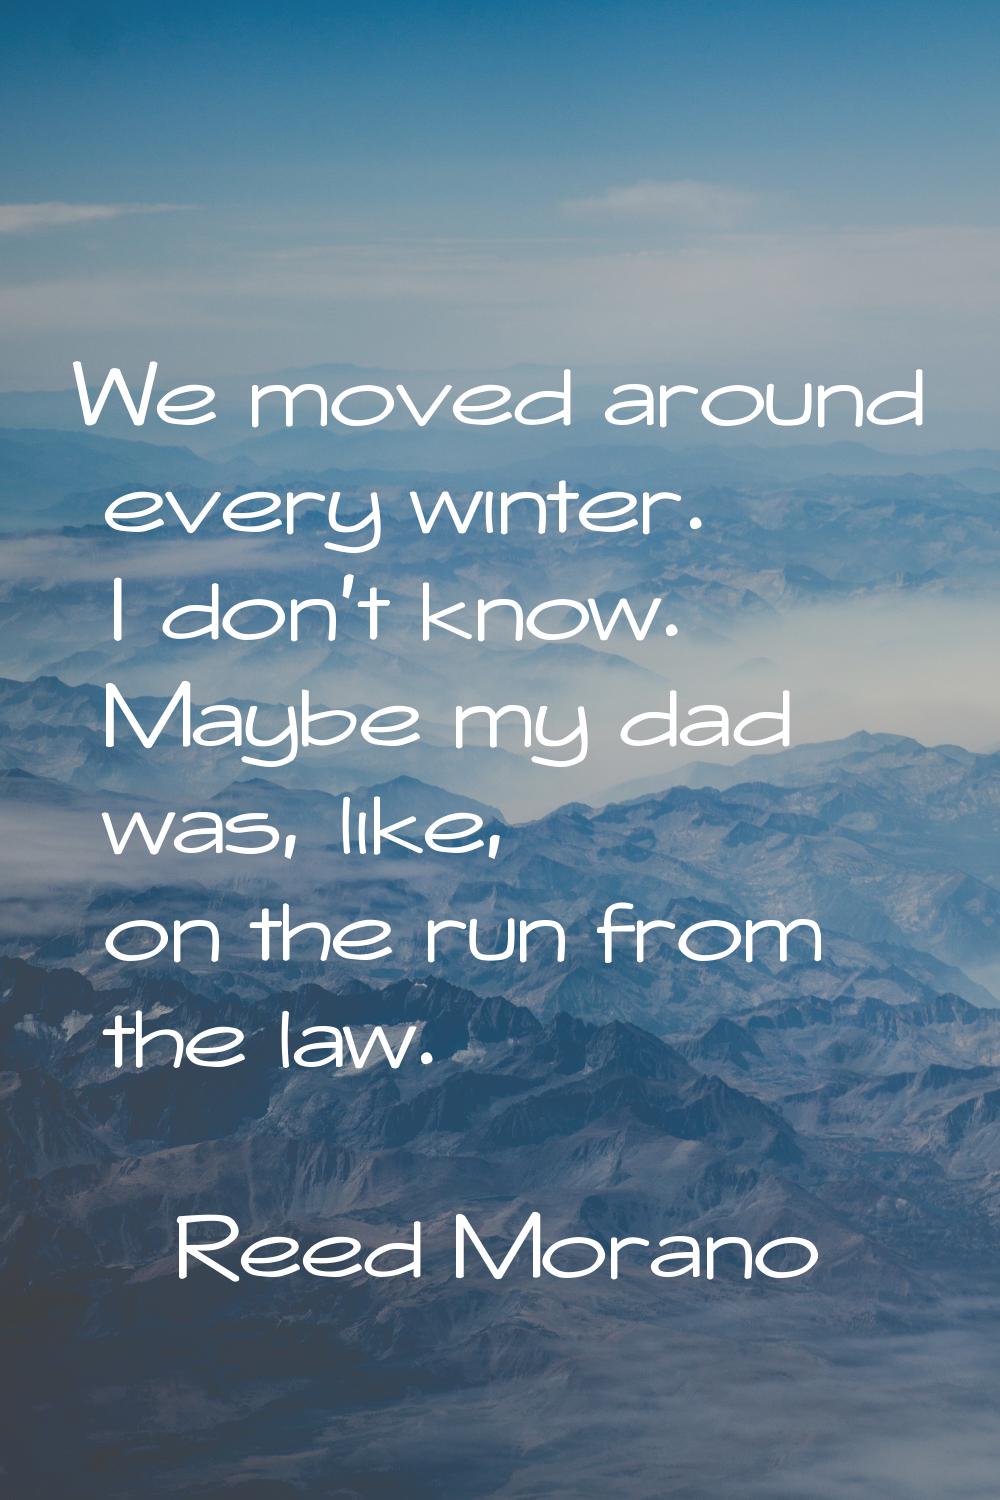 We moved around every winter. I don't know. Maybe my dad was, like, on the run from the law.